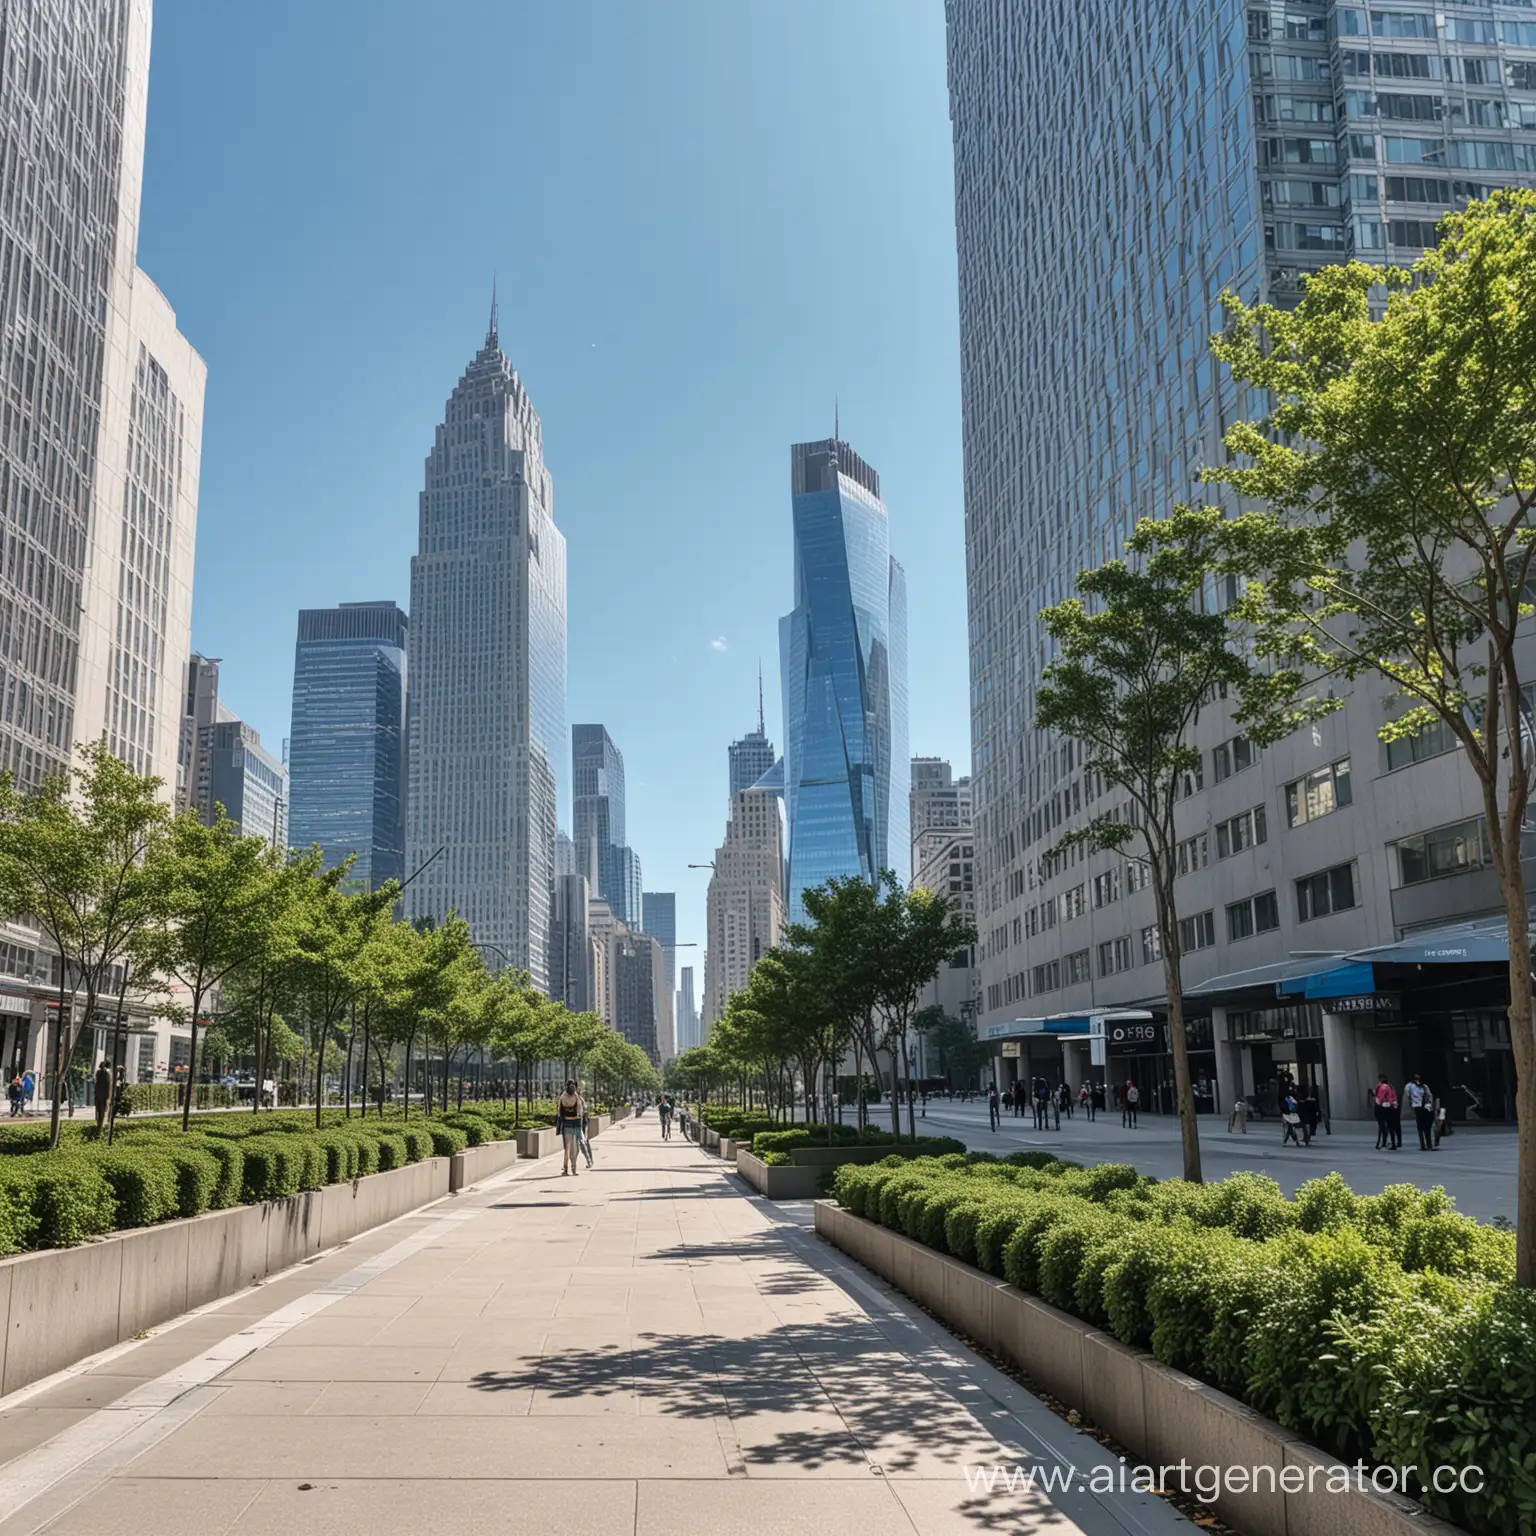 Urban-Sidewalk-with-Skyscrapers-and-Greenery